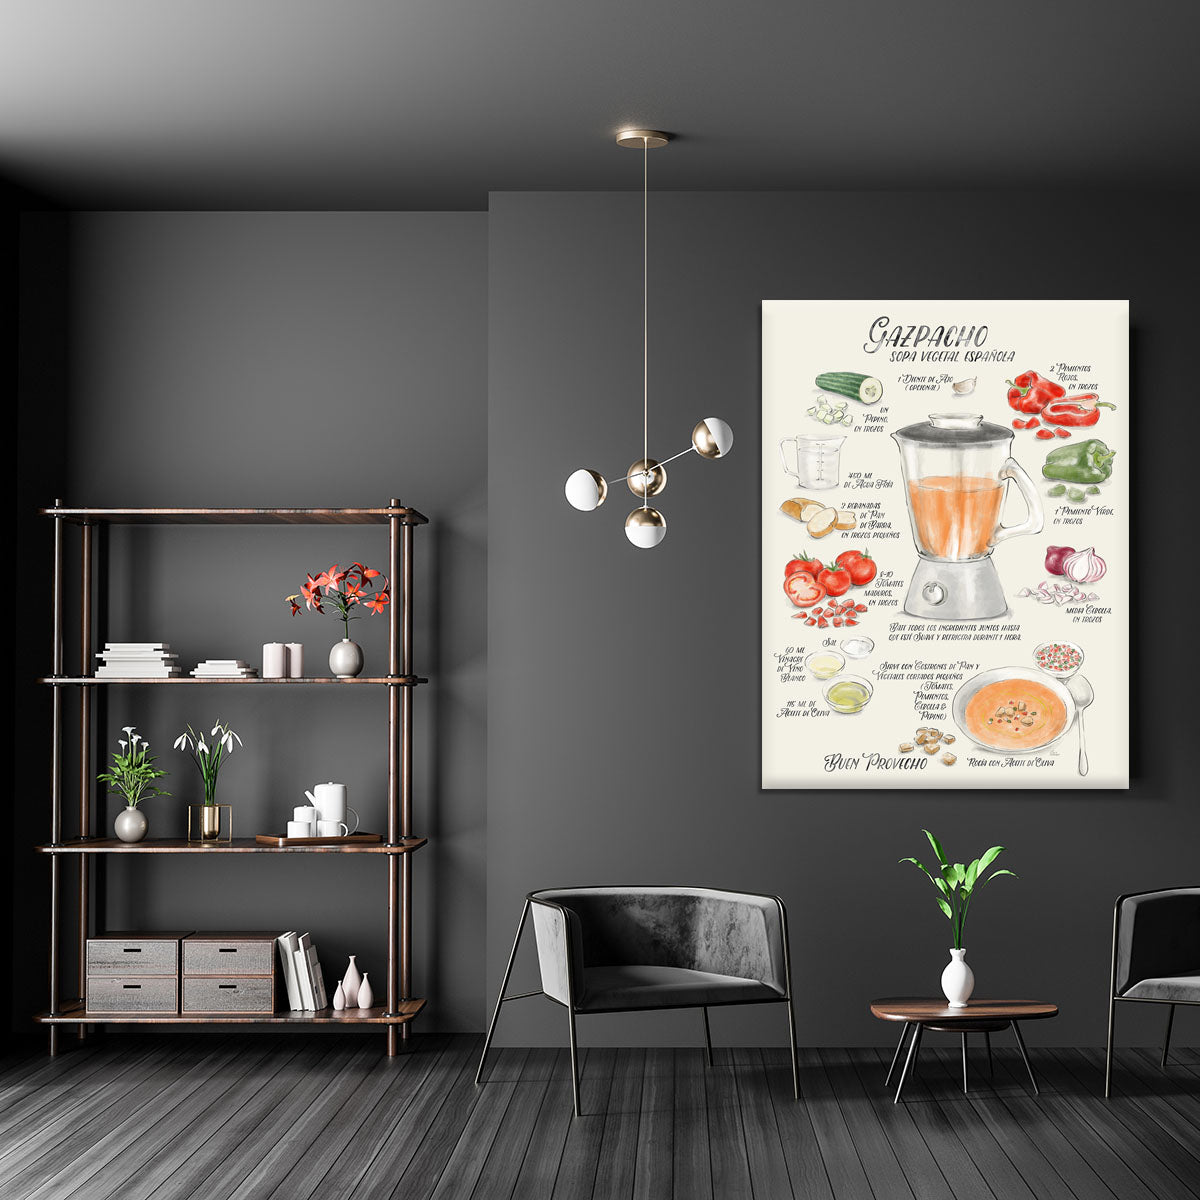 Gazpacho illustrated recipe in Spanish Canvas Print or Poster - Canvas Art Rocks - 5